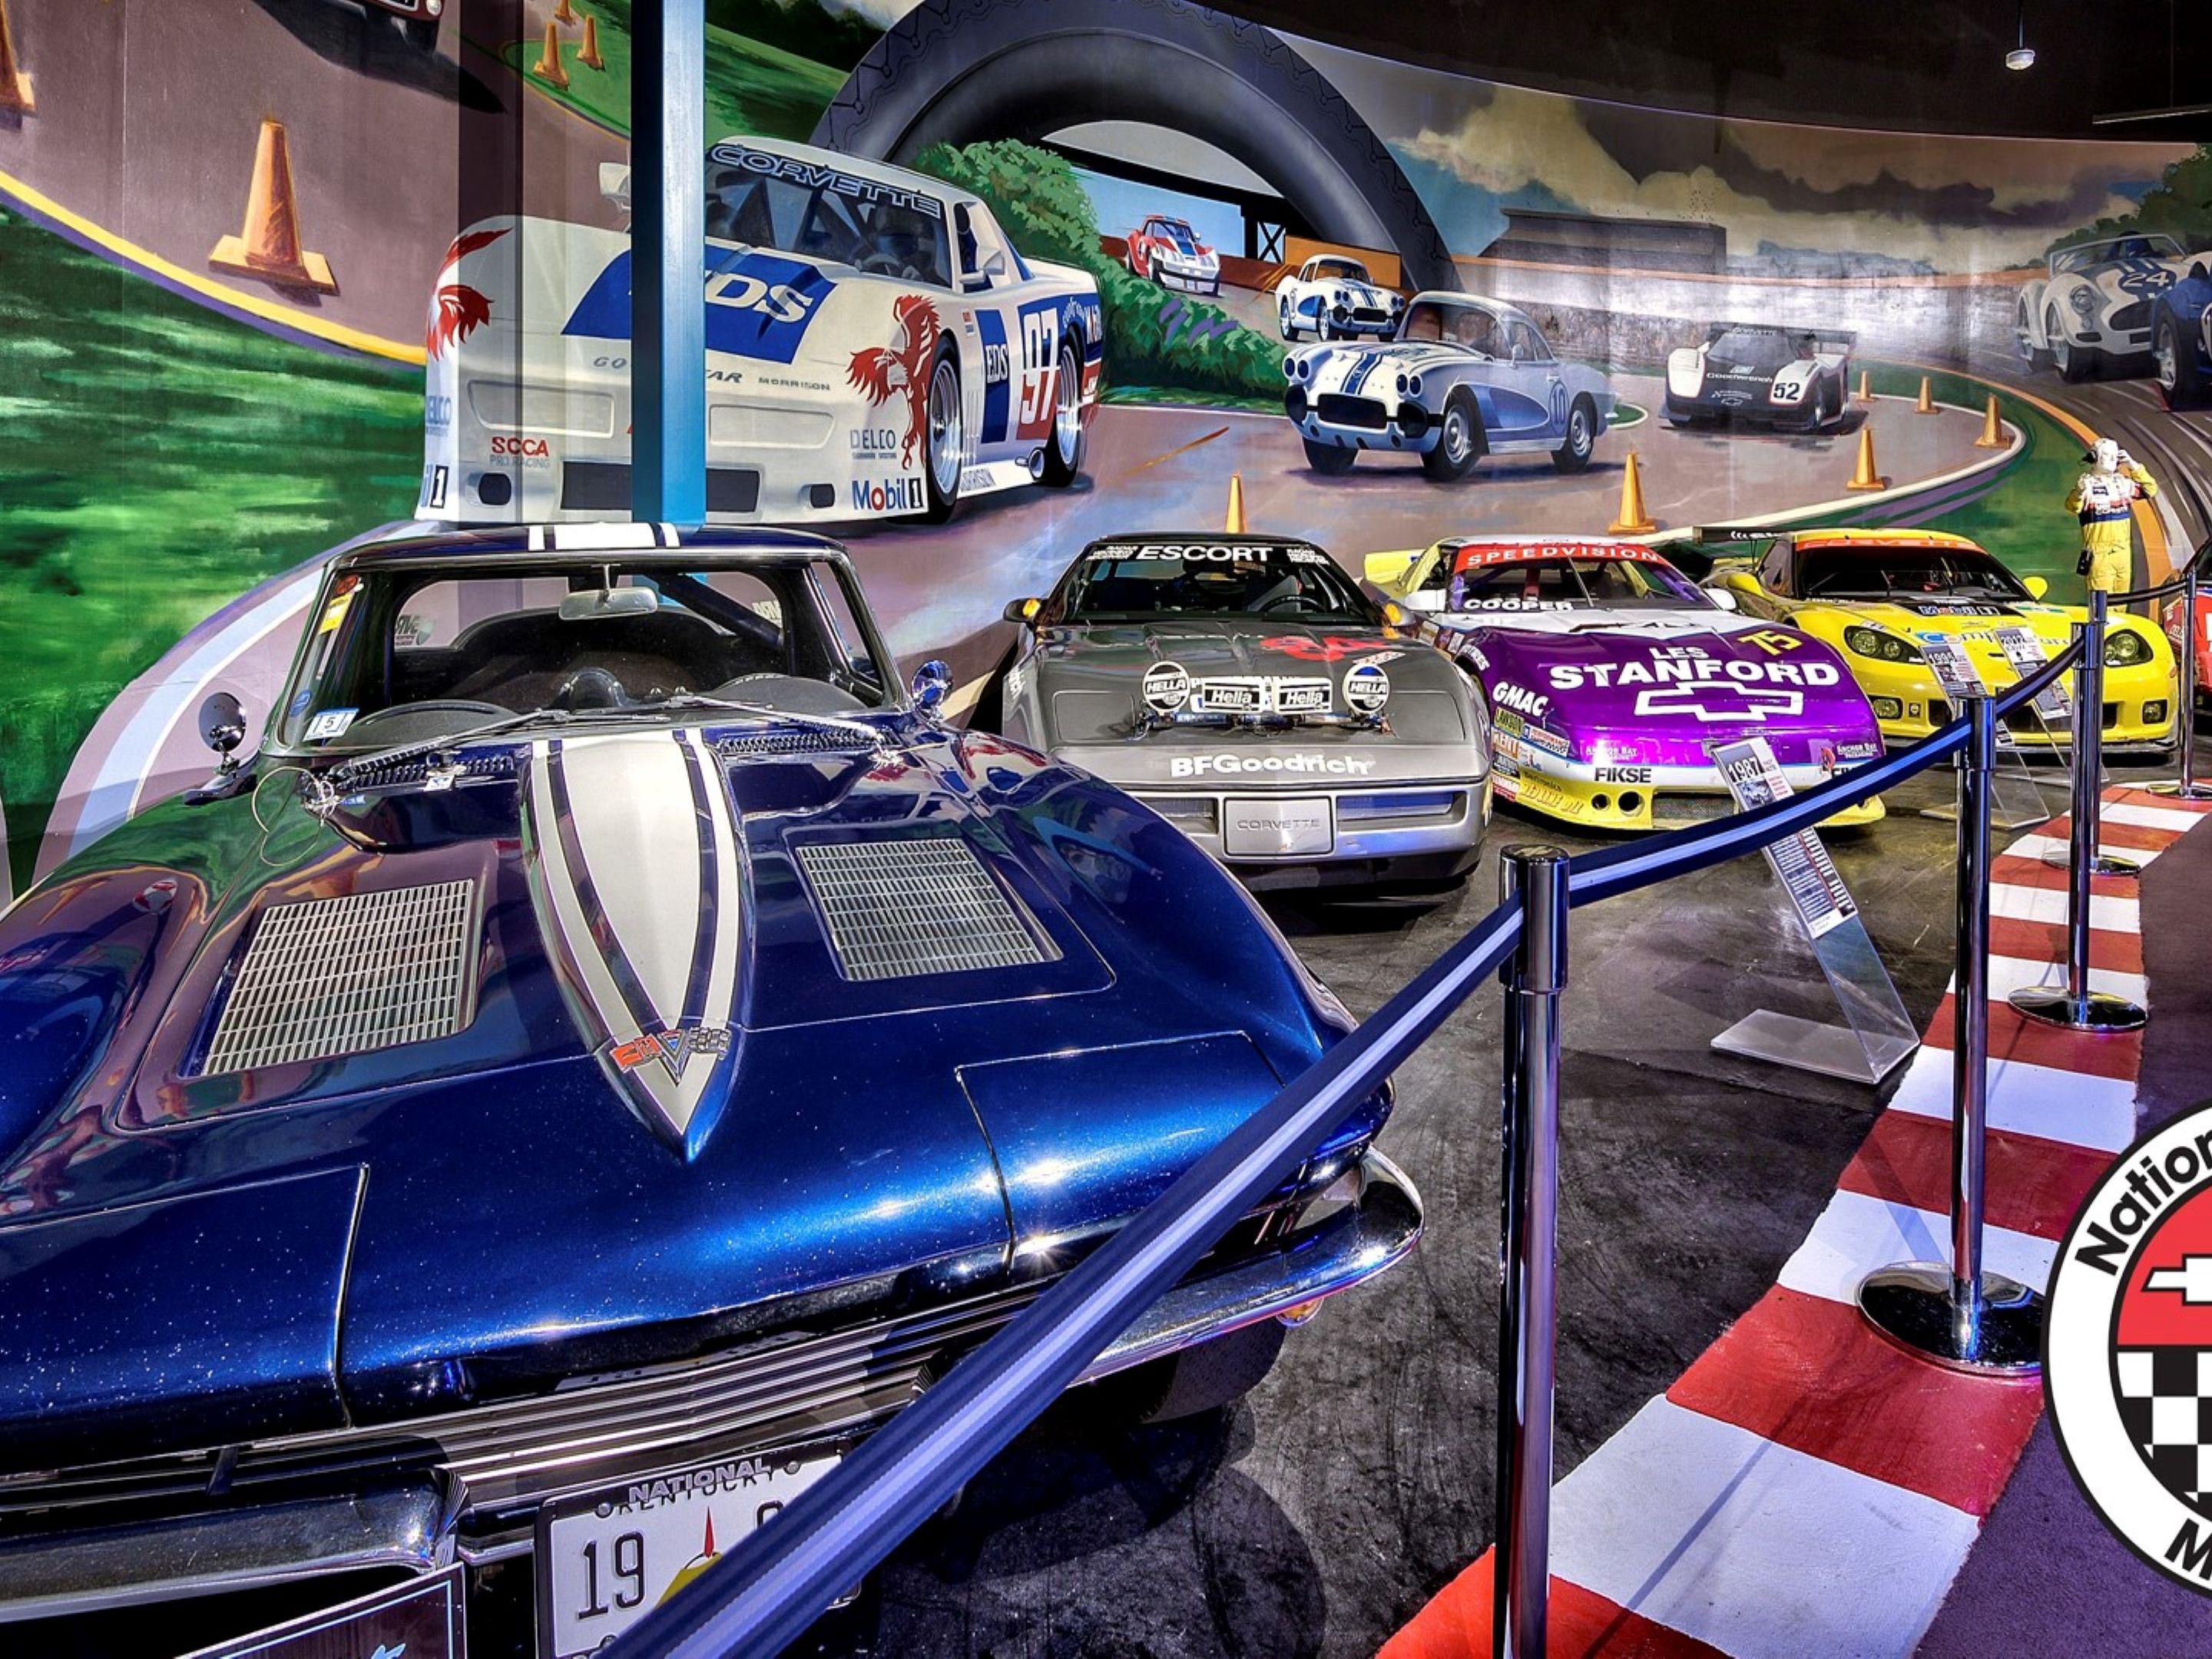 Visit the Corvette Museum and Save!